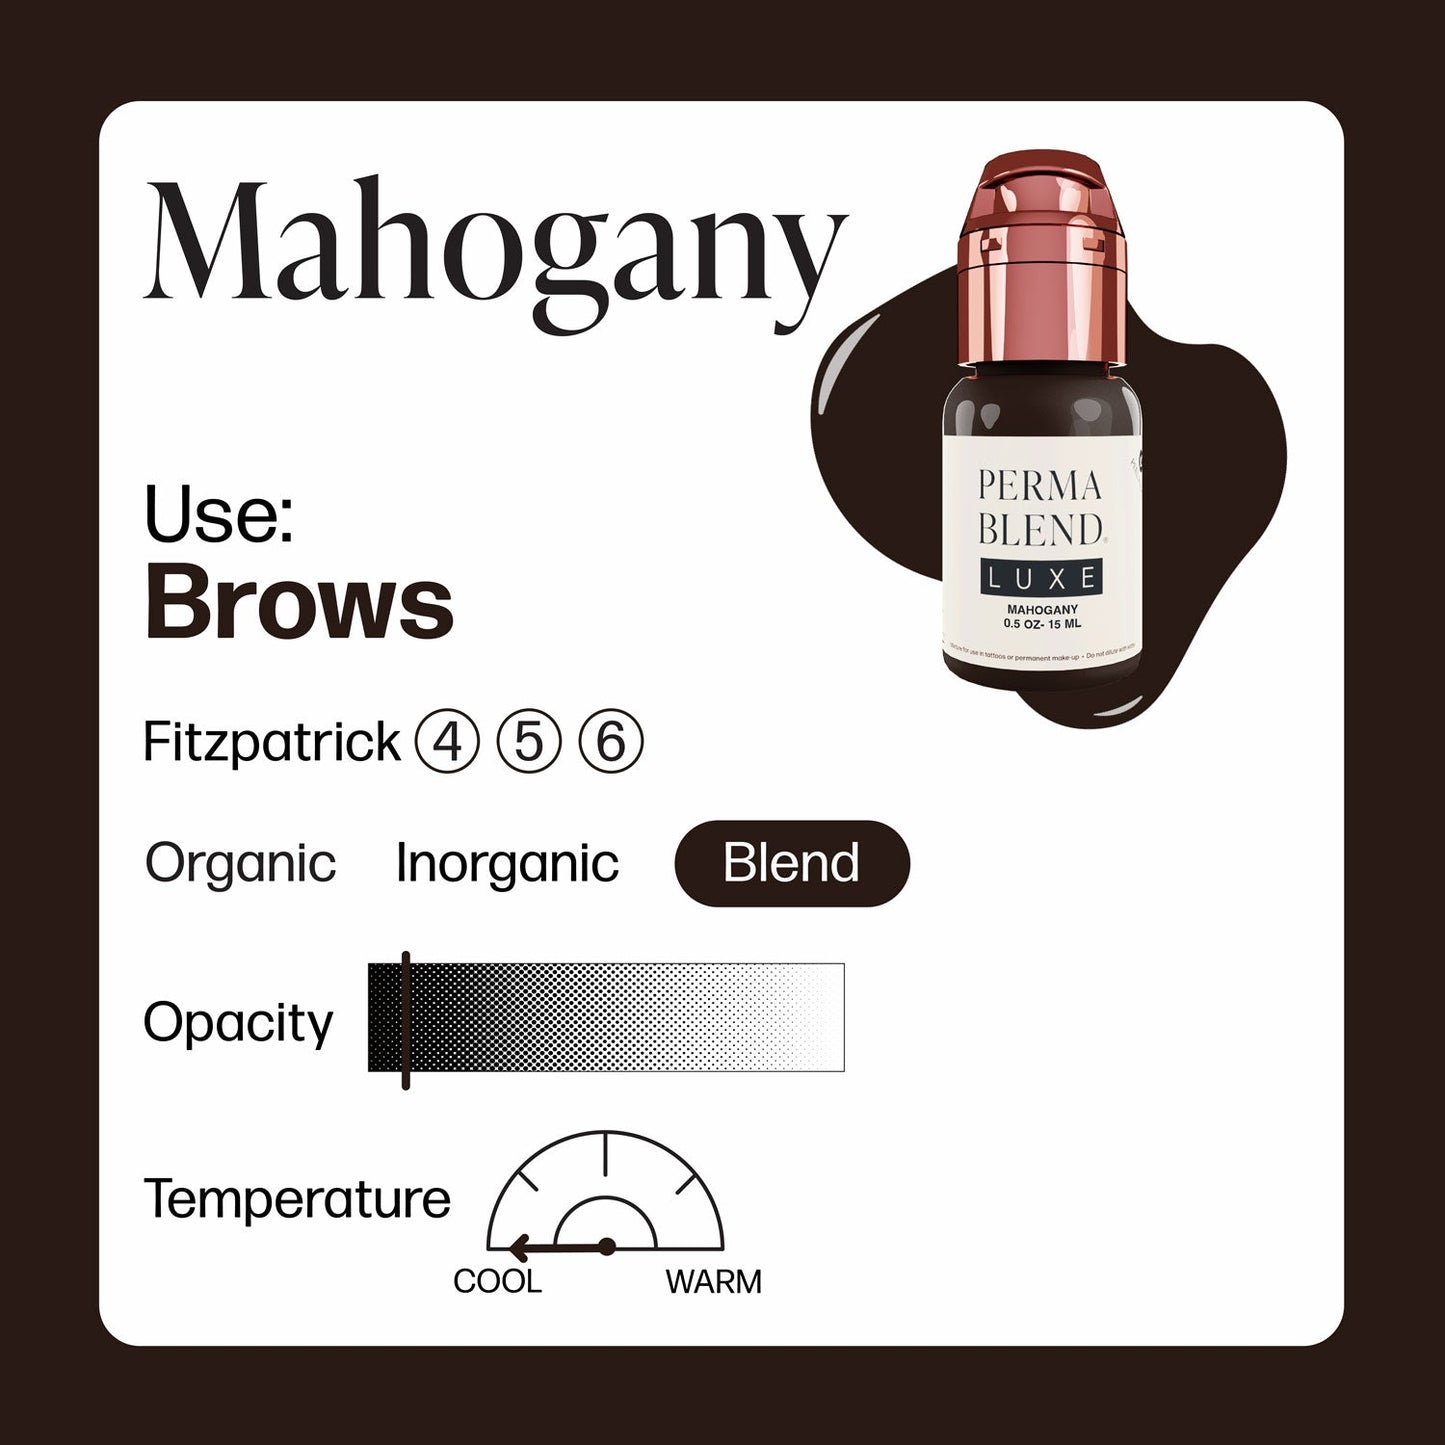 Perma Blend LUXE Mahogany Brow Ink